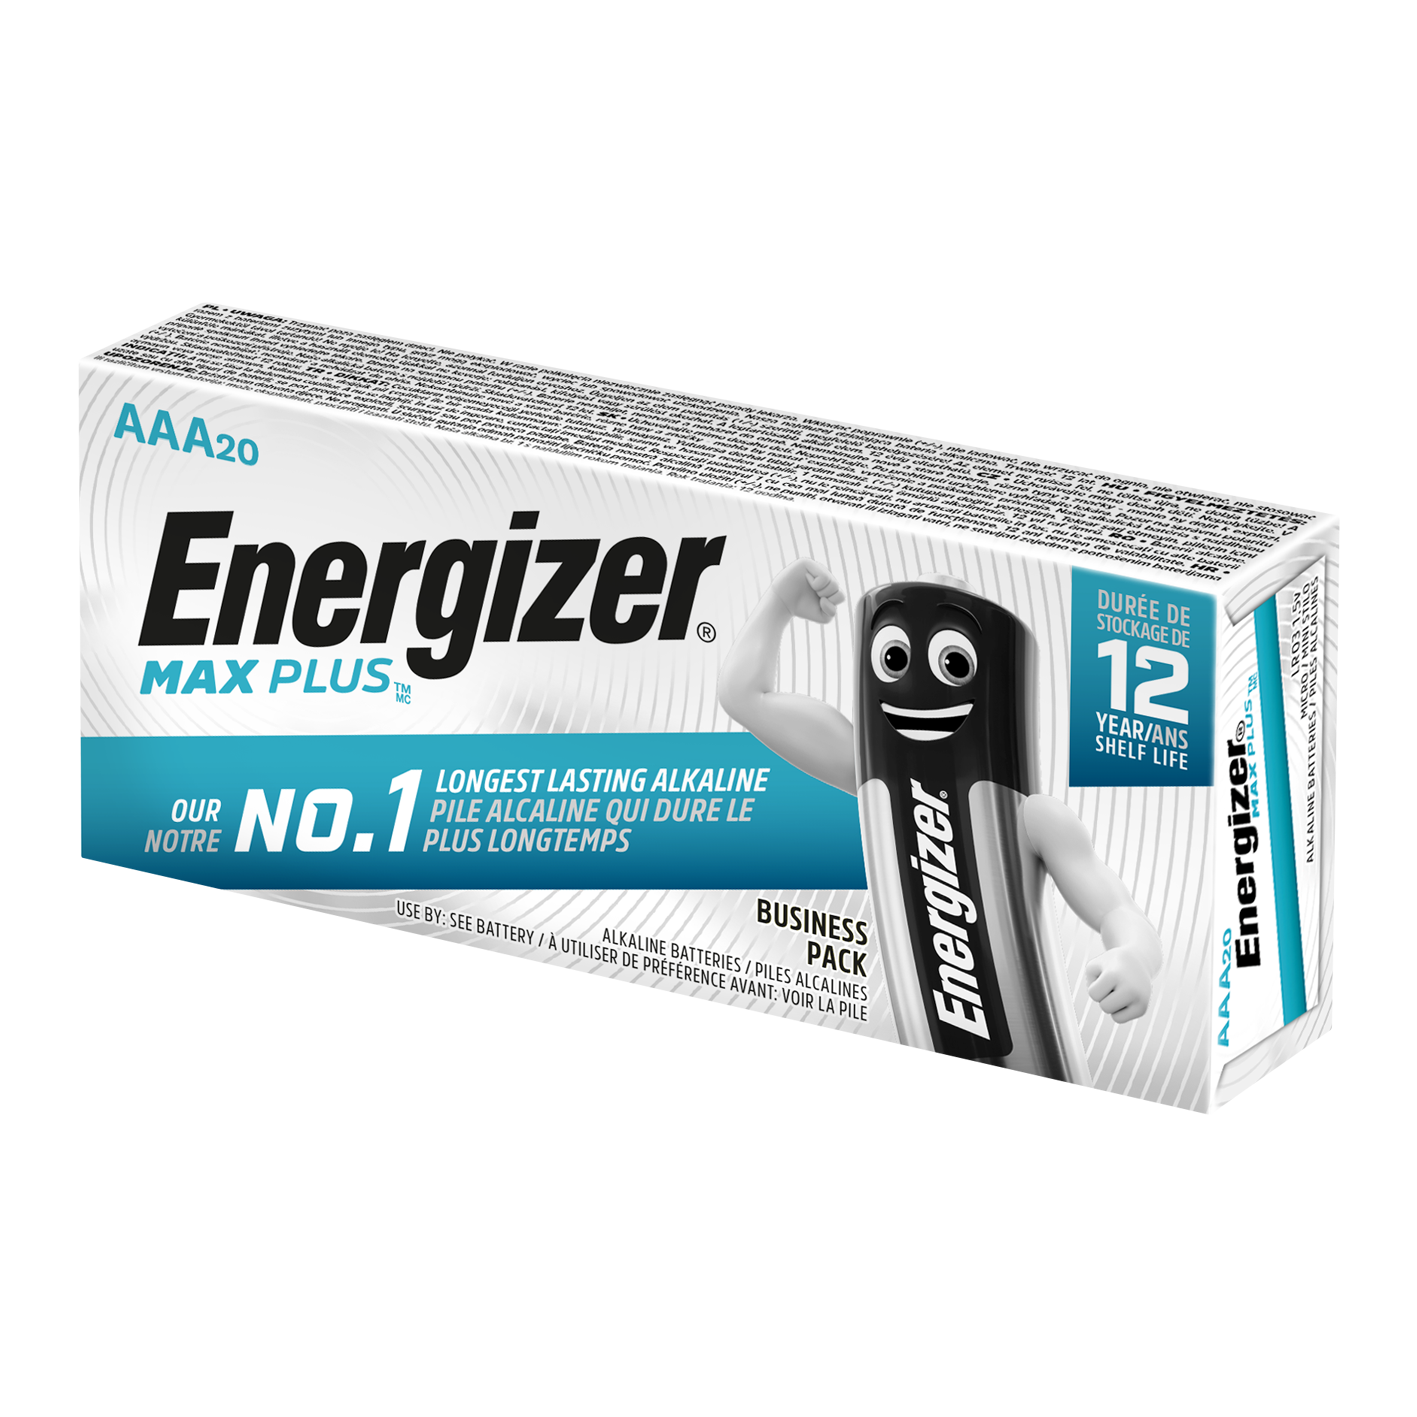 Energizer® AAA Max Plus Alkaline, Pack of 20 - Business Pack